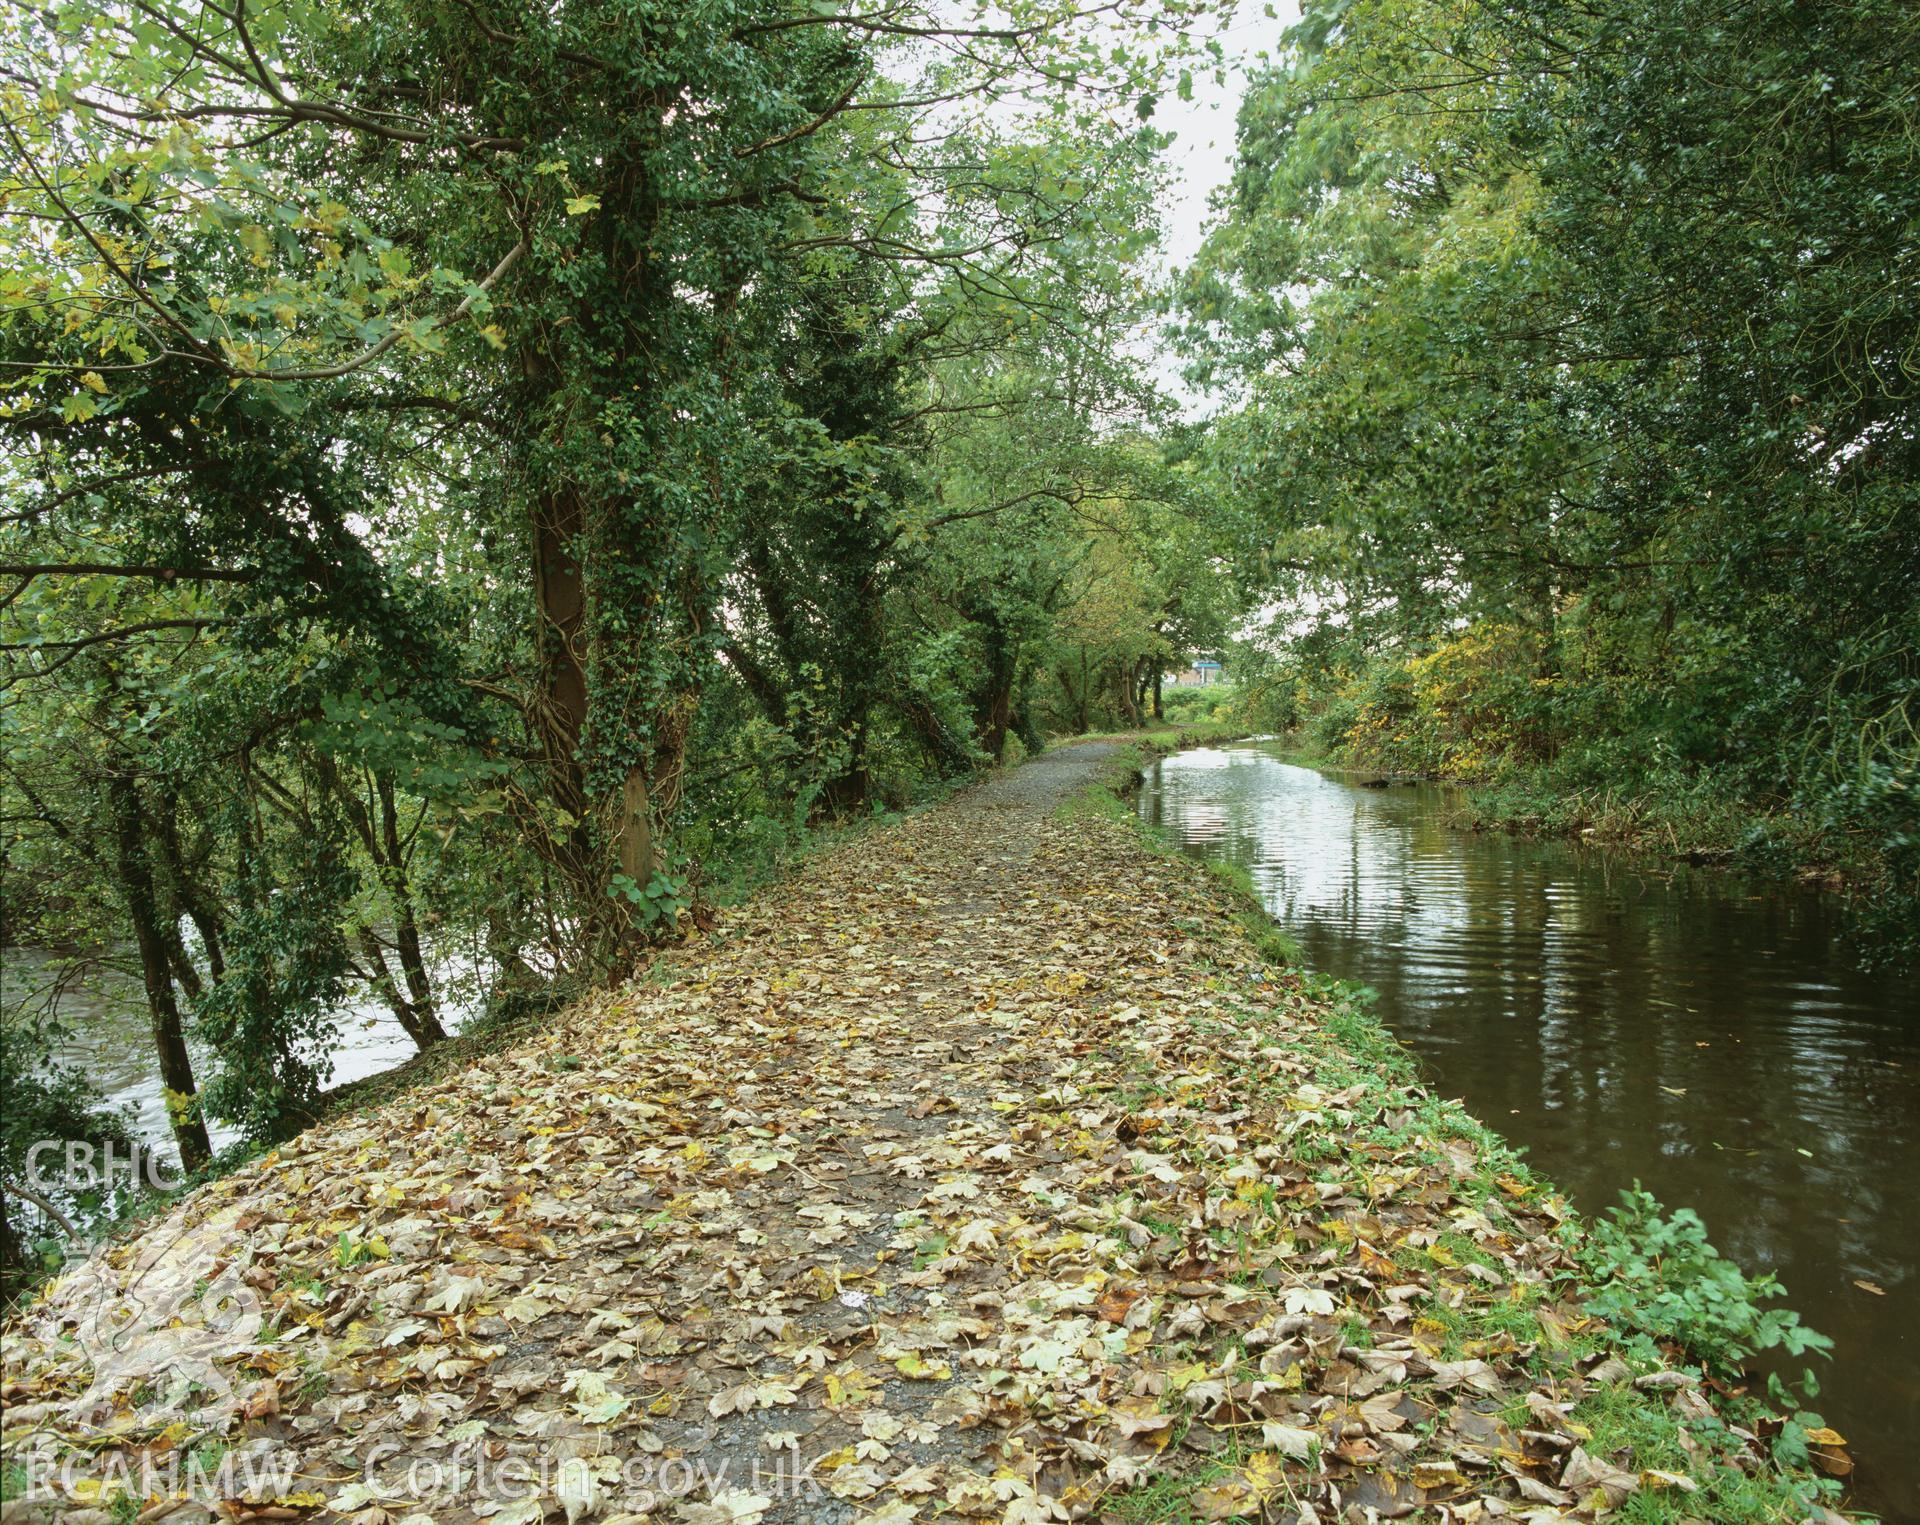 Colour transparency showing  view of a raised embankment at Trebanws, part of Swansea Canal, produced by Iain Wright, October 2005.